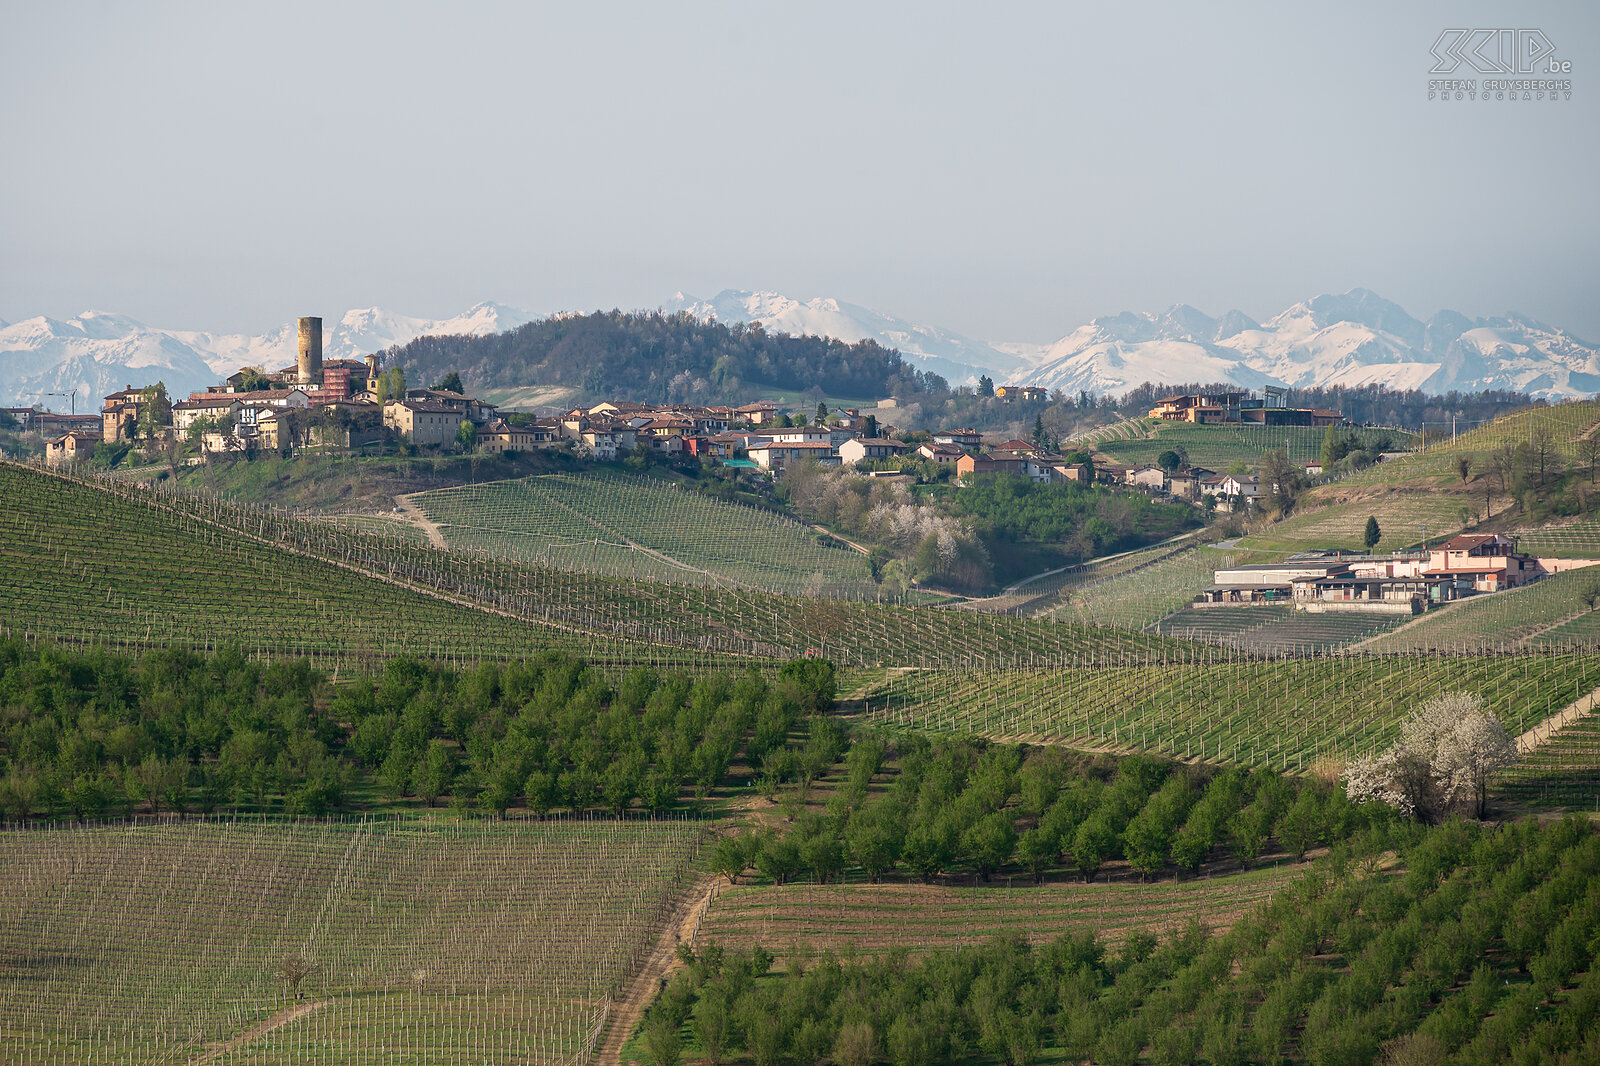 Langhe region The beautiful Langhe Roero Monferrato region with the many famous vineyards and picturesque villages on the hills and in the distance some snowy Alpine peaks Stefan Cruysberghs